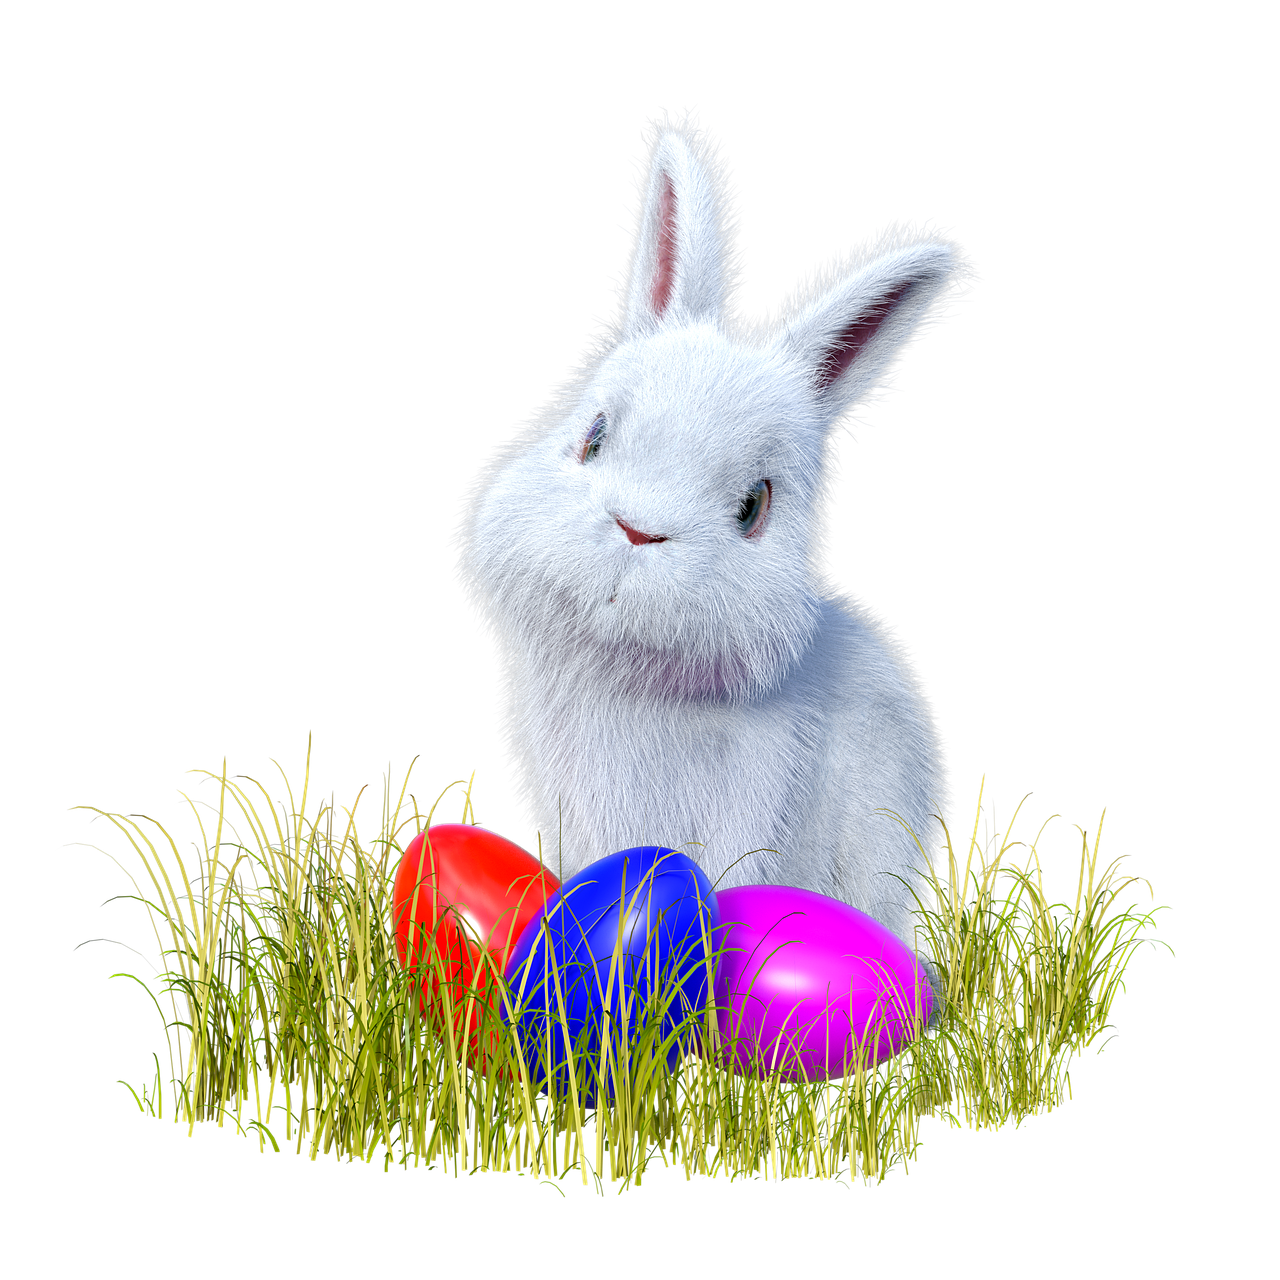 A white bunny in a field with bright Easter eggs in front of it